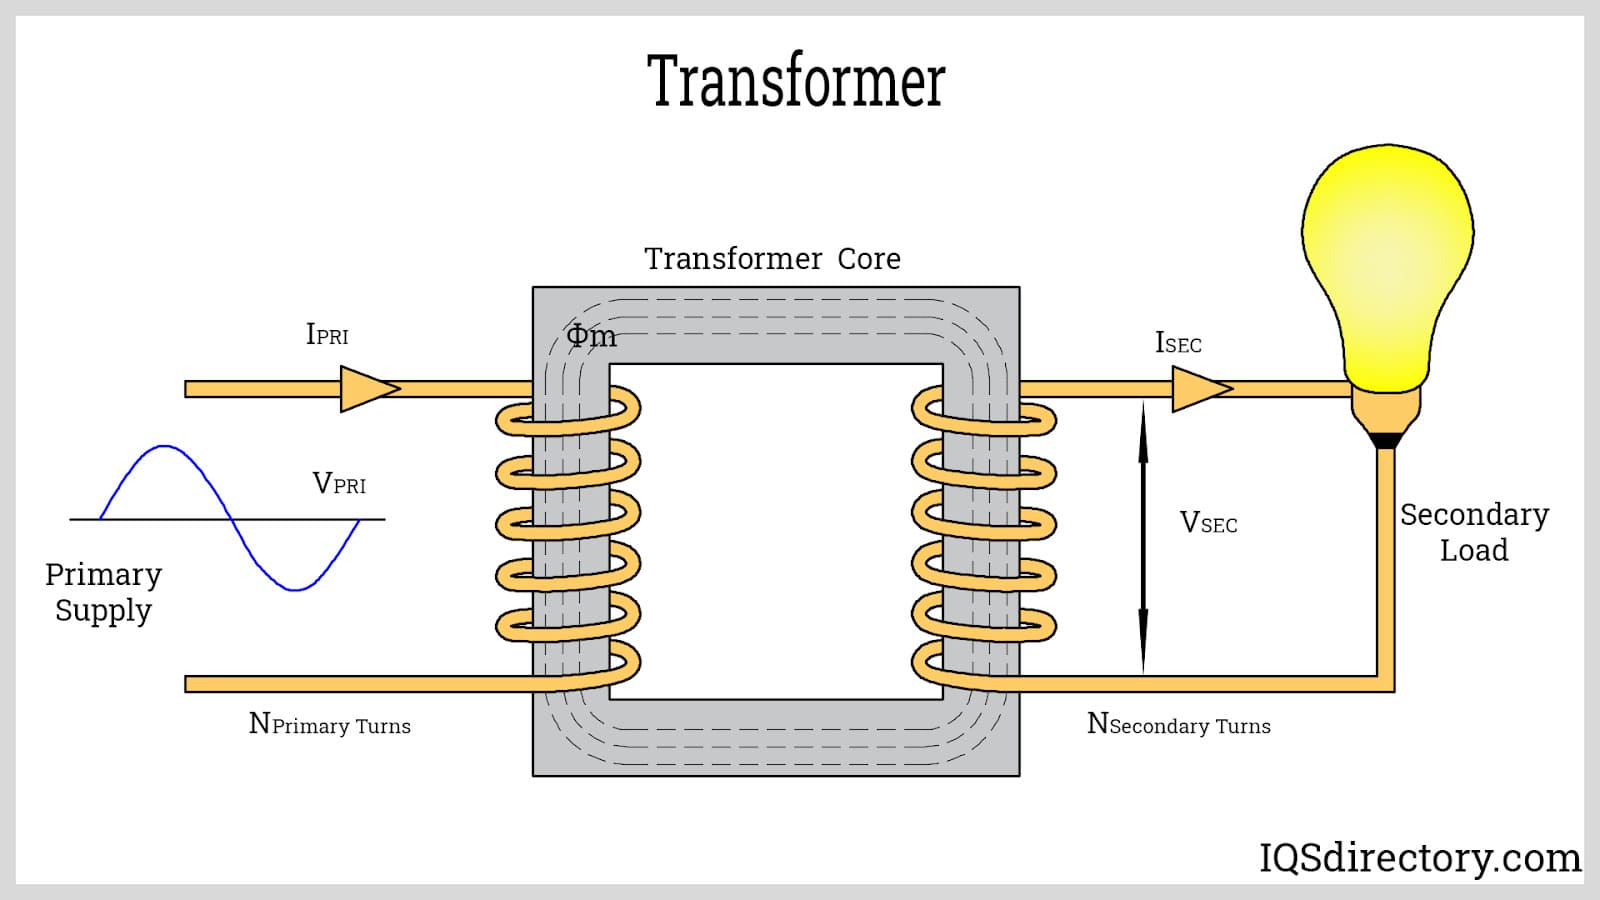 DC Power Supply: What Is It? Where Is It Used? AC vs. DC